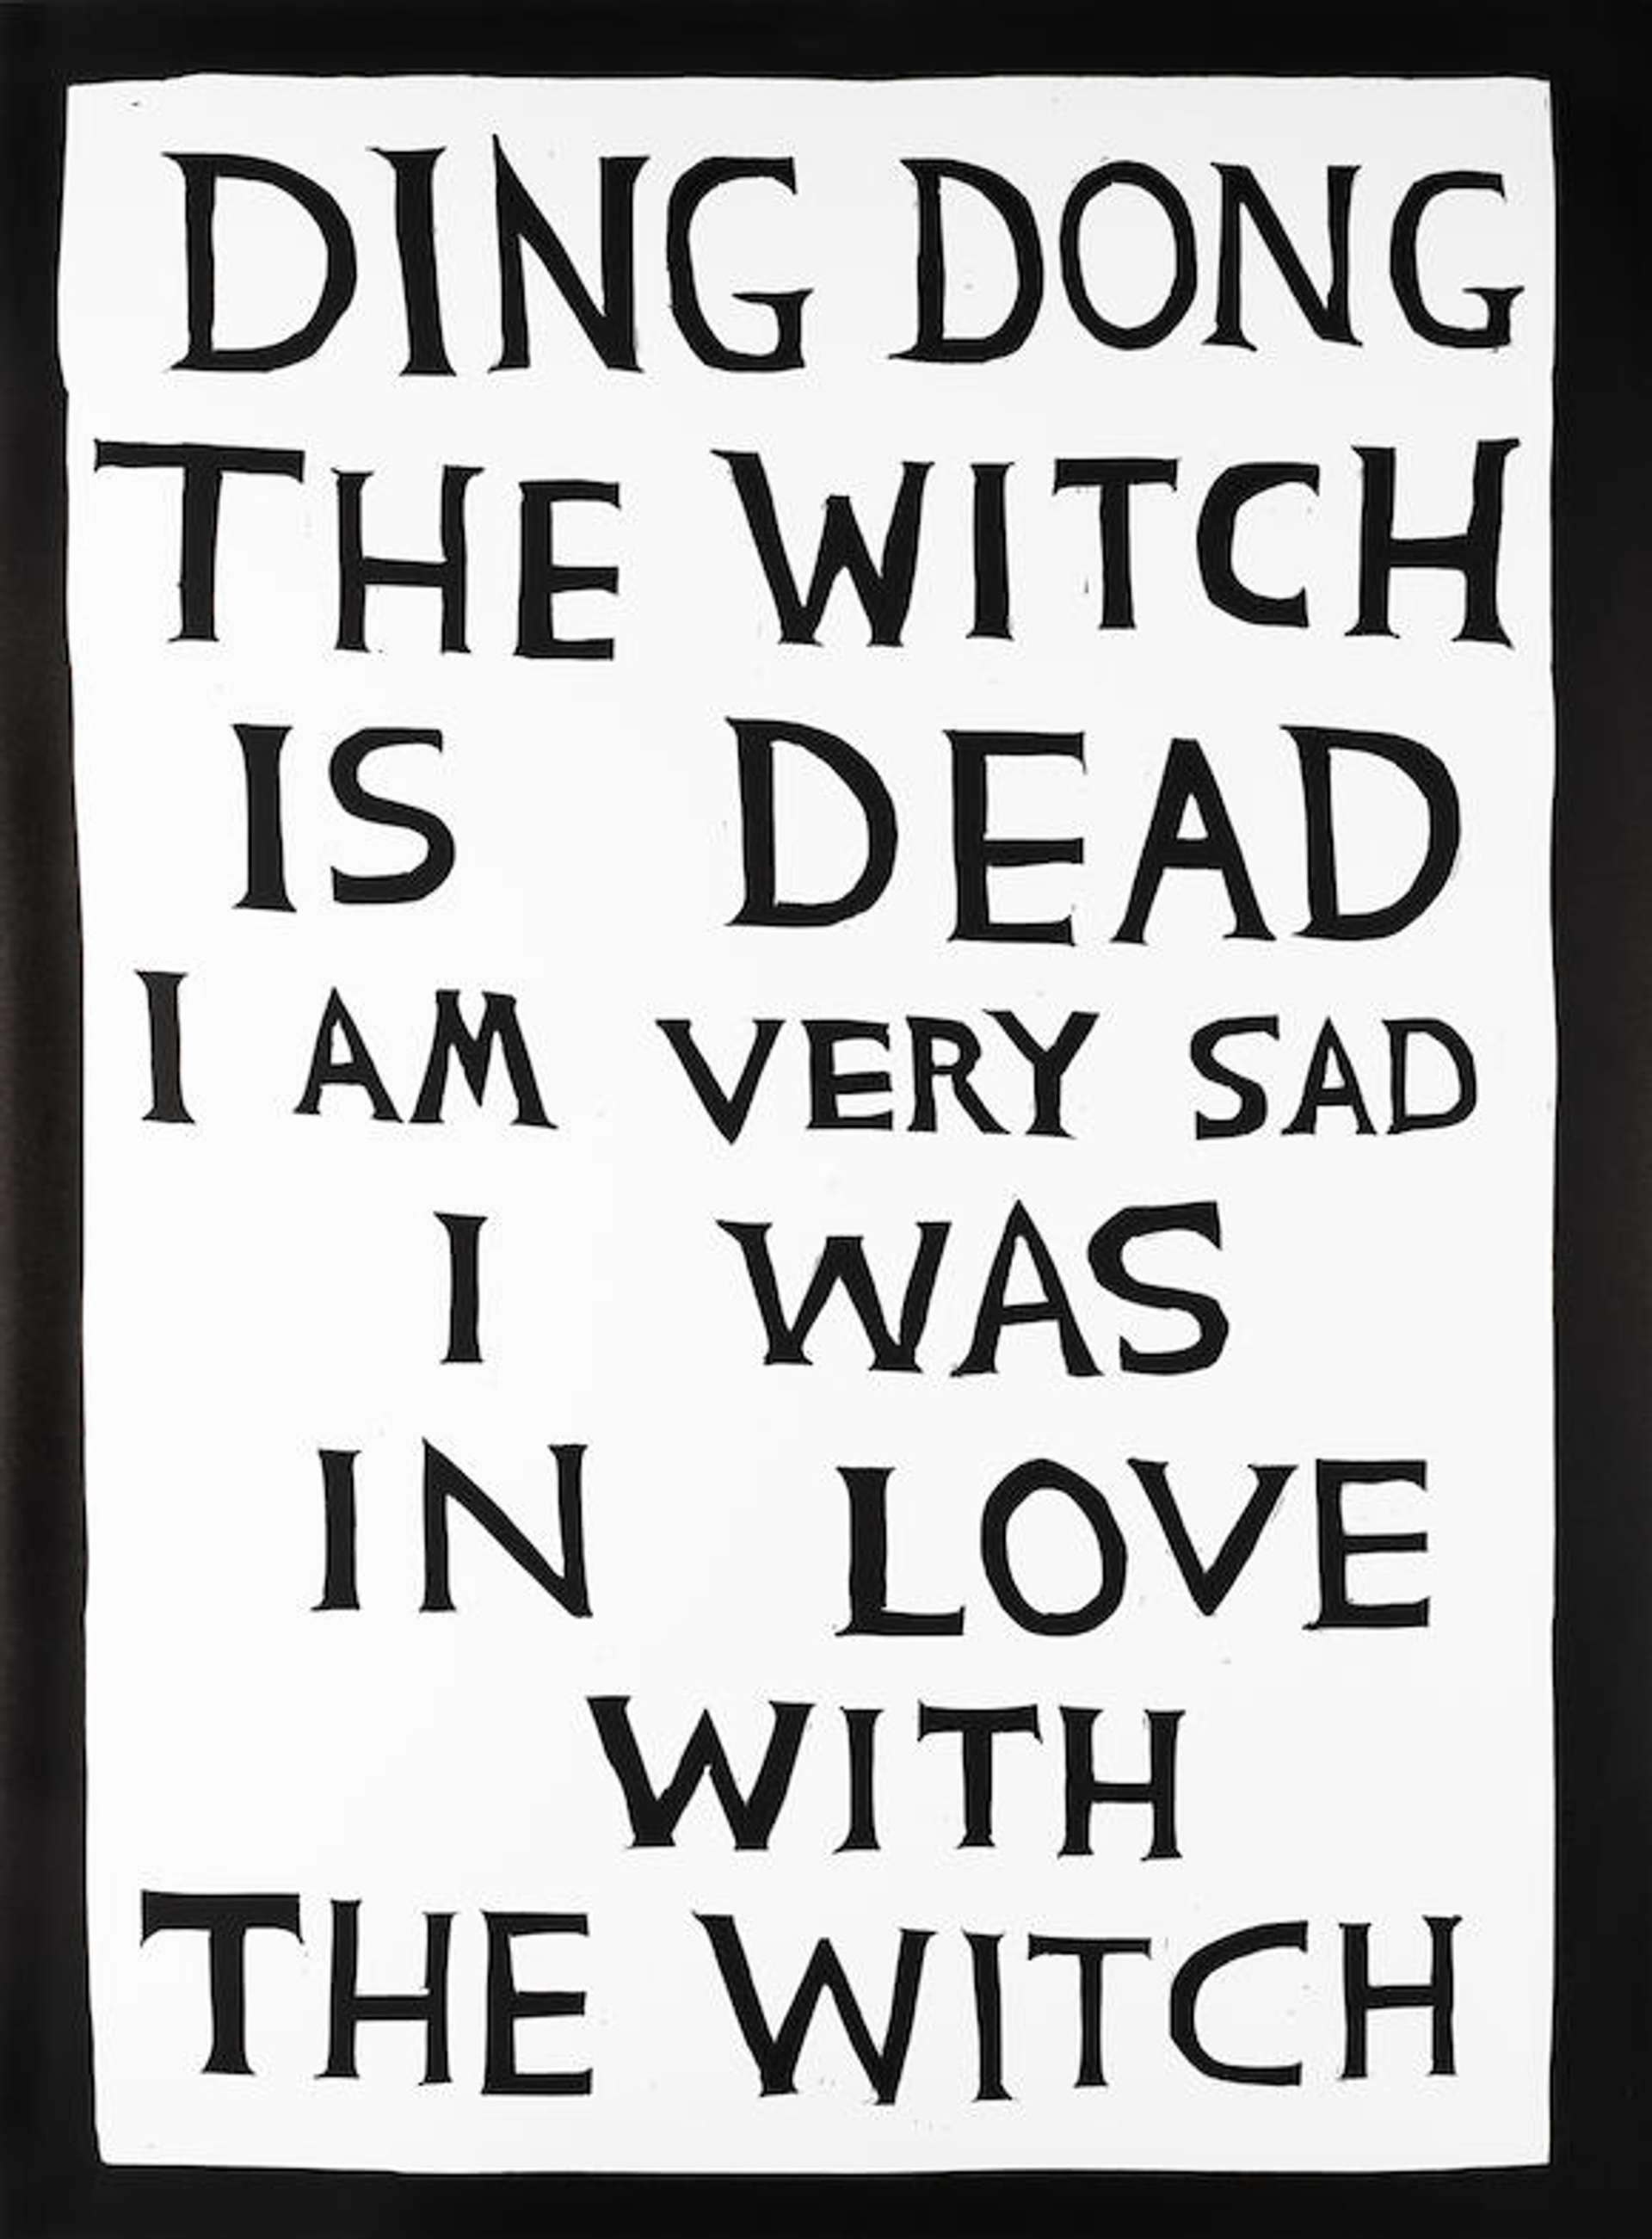 Ding Dong The Witch Is Dead - Signed Print by David Shrigley 2022 - MyArtBroker